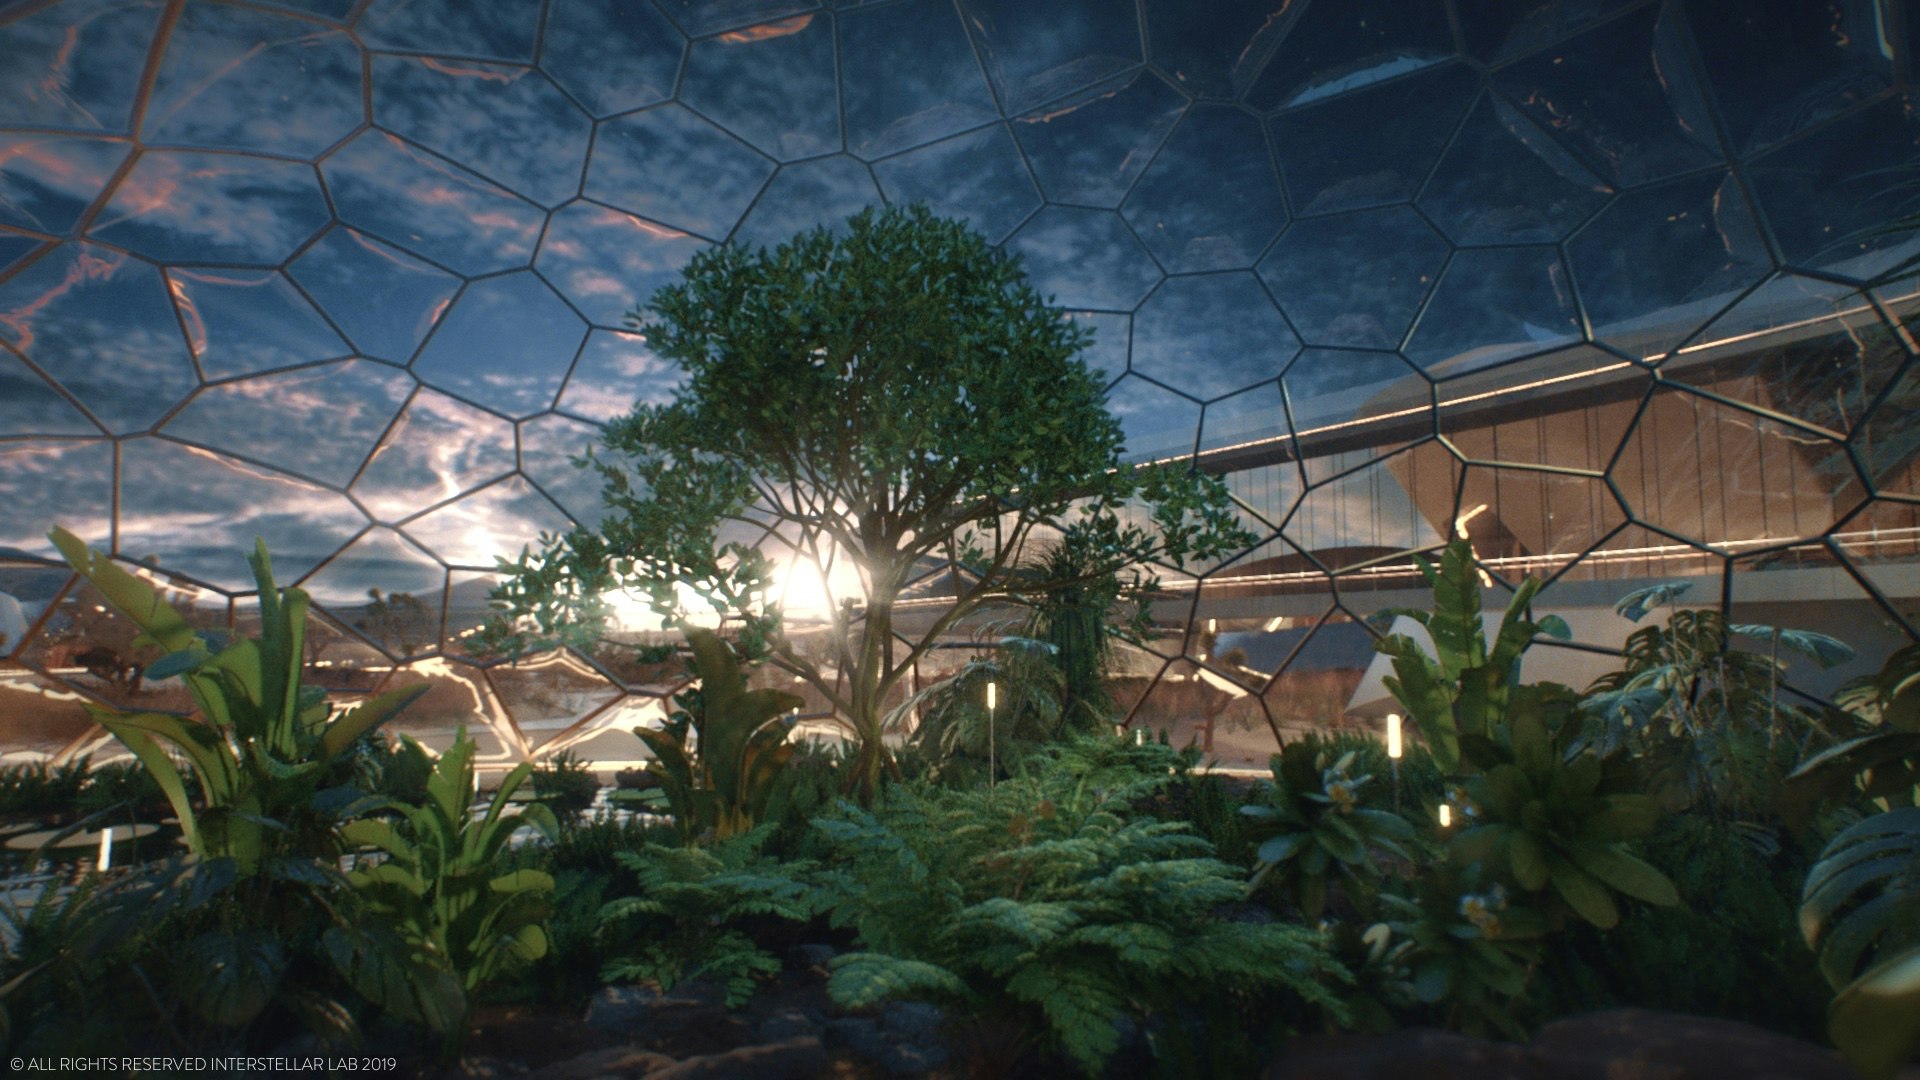 Plants (ferns and trees) inside one of the biodomes